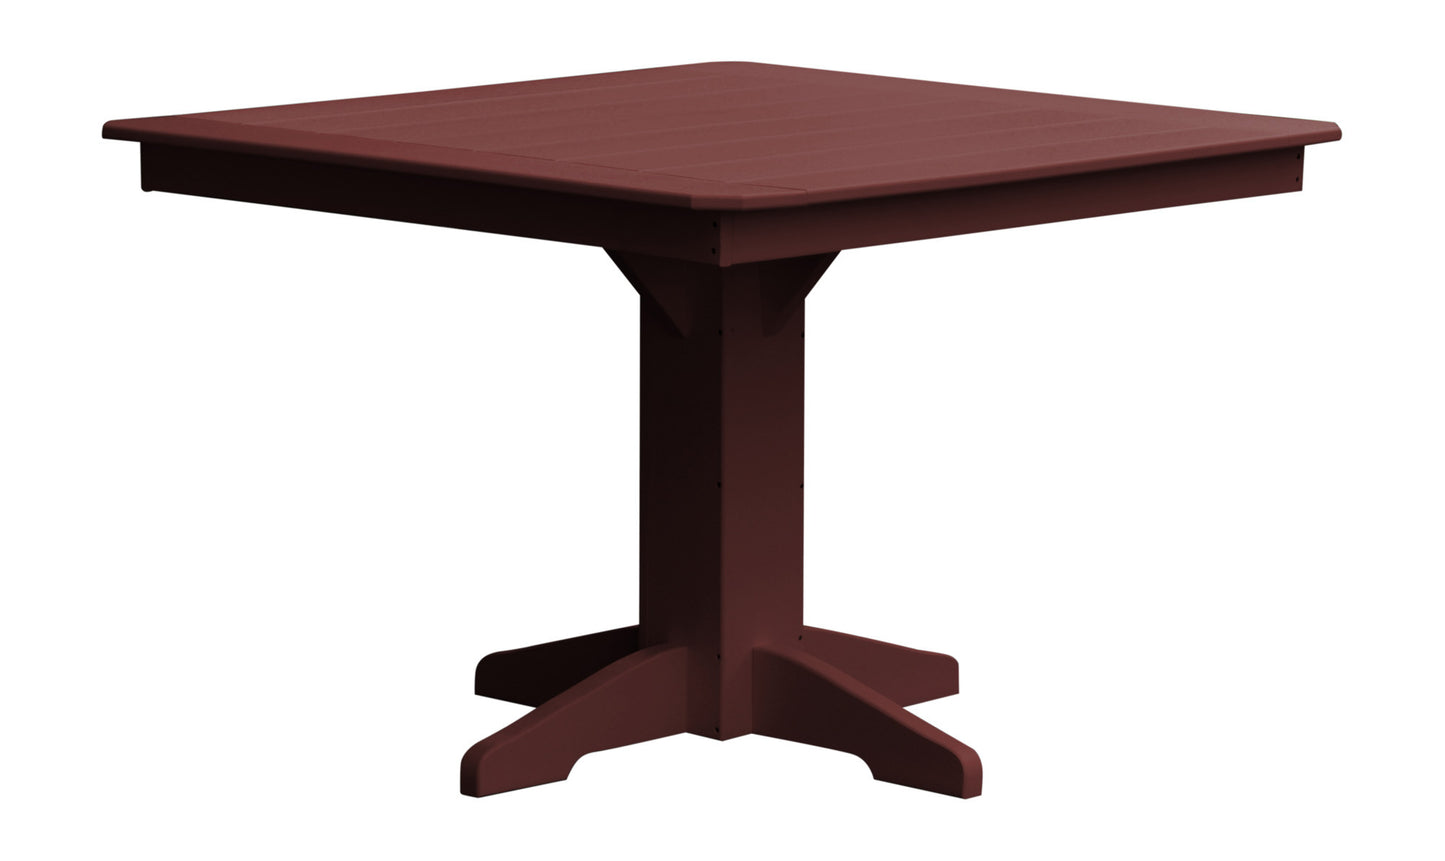 A&L Furniture Recycled Plastic 44" Square Dining Table - Cherrywood